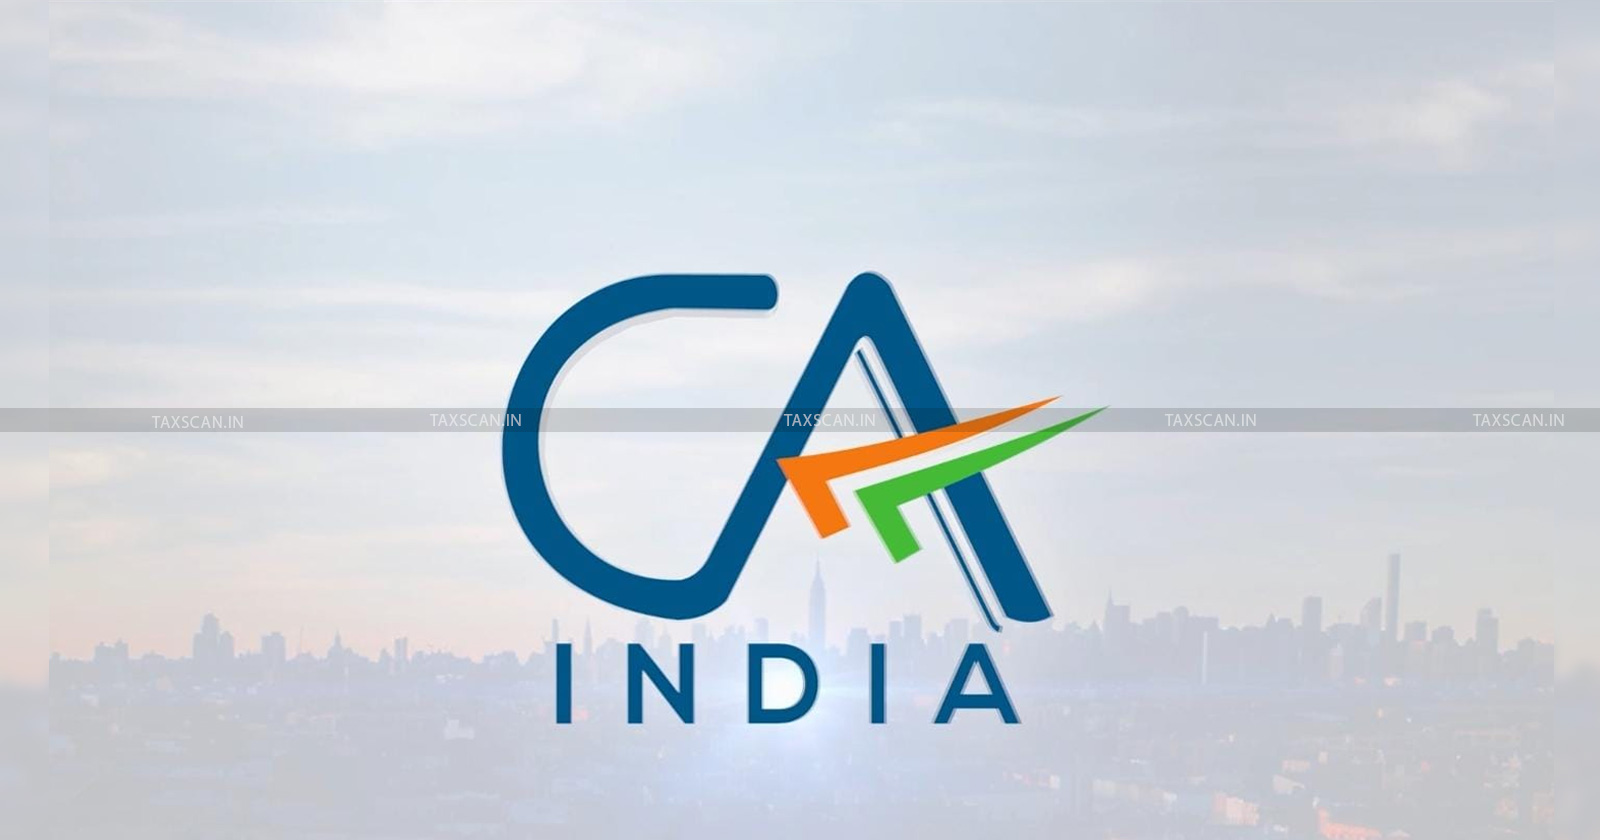 Chartered Accountants Act - ICAI finds CA - Tax news - Taxscan